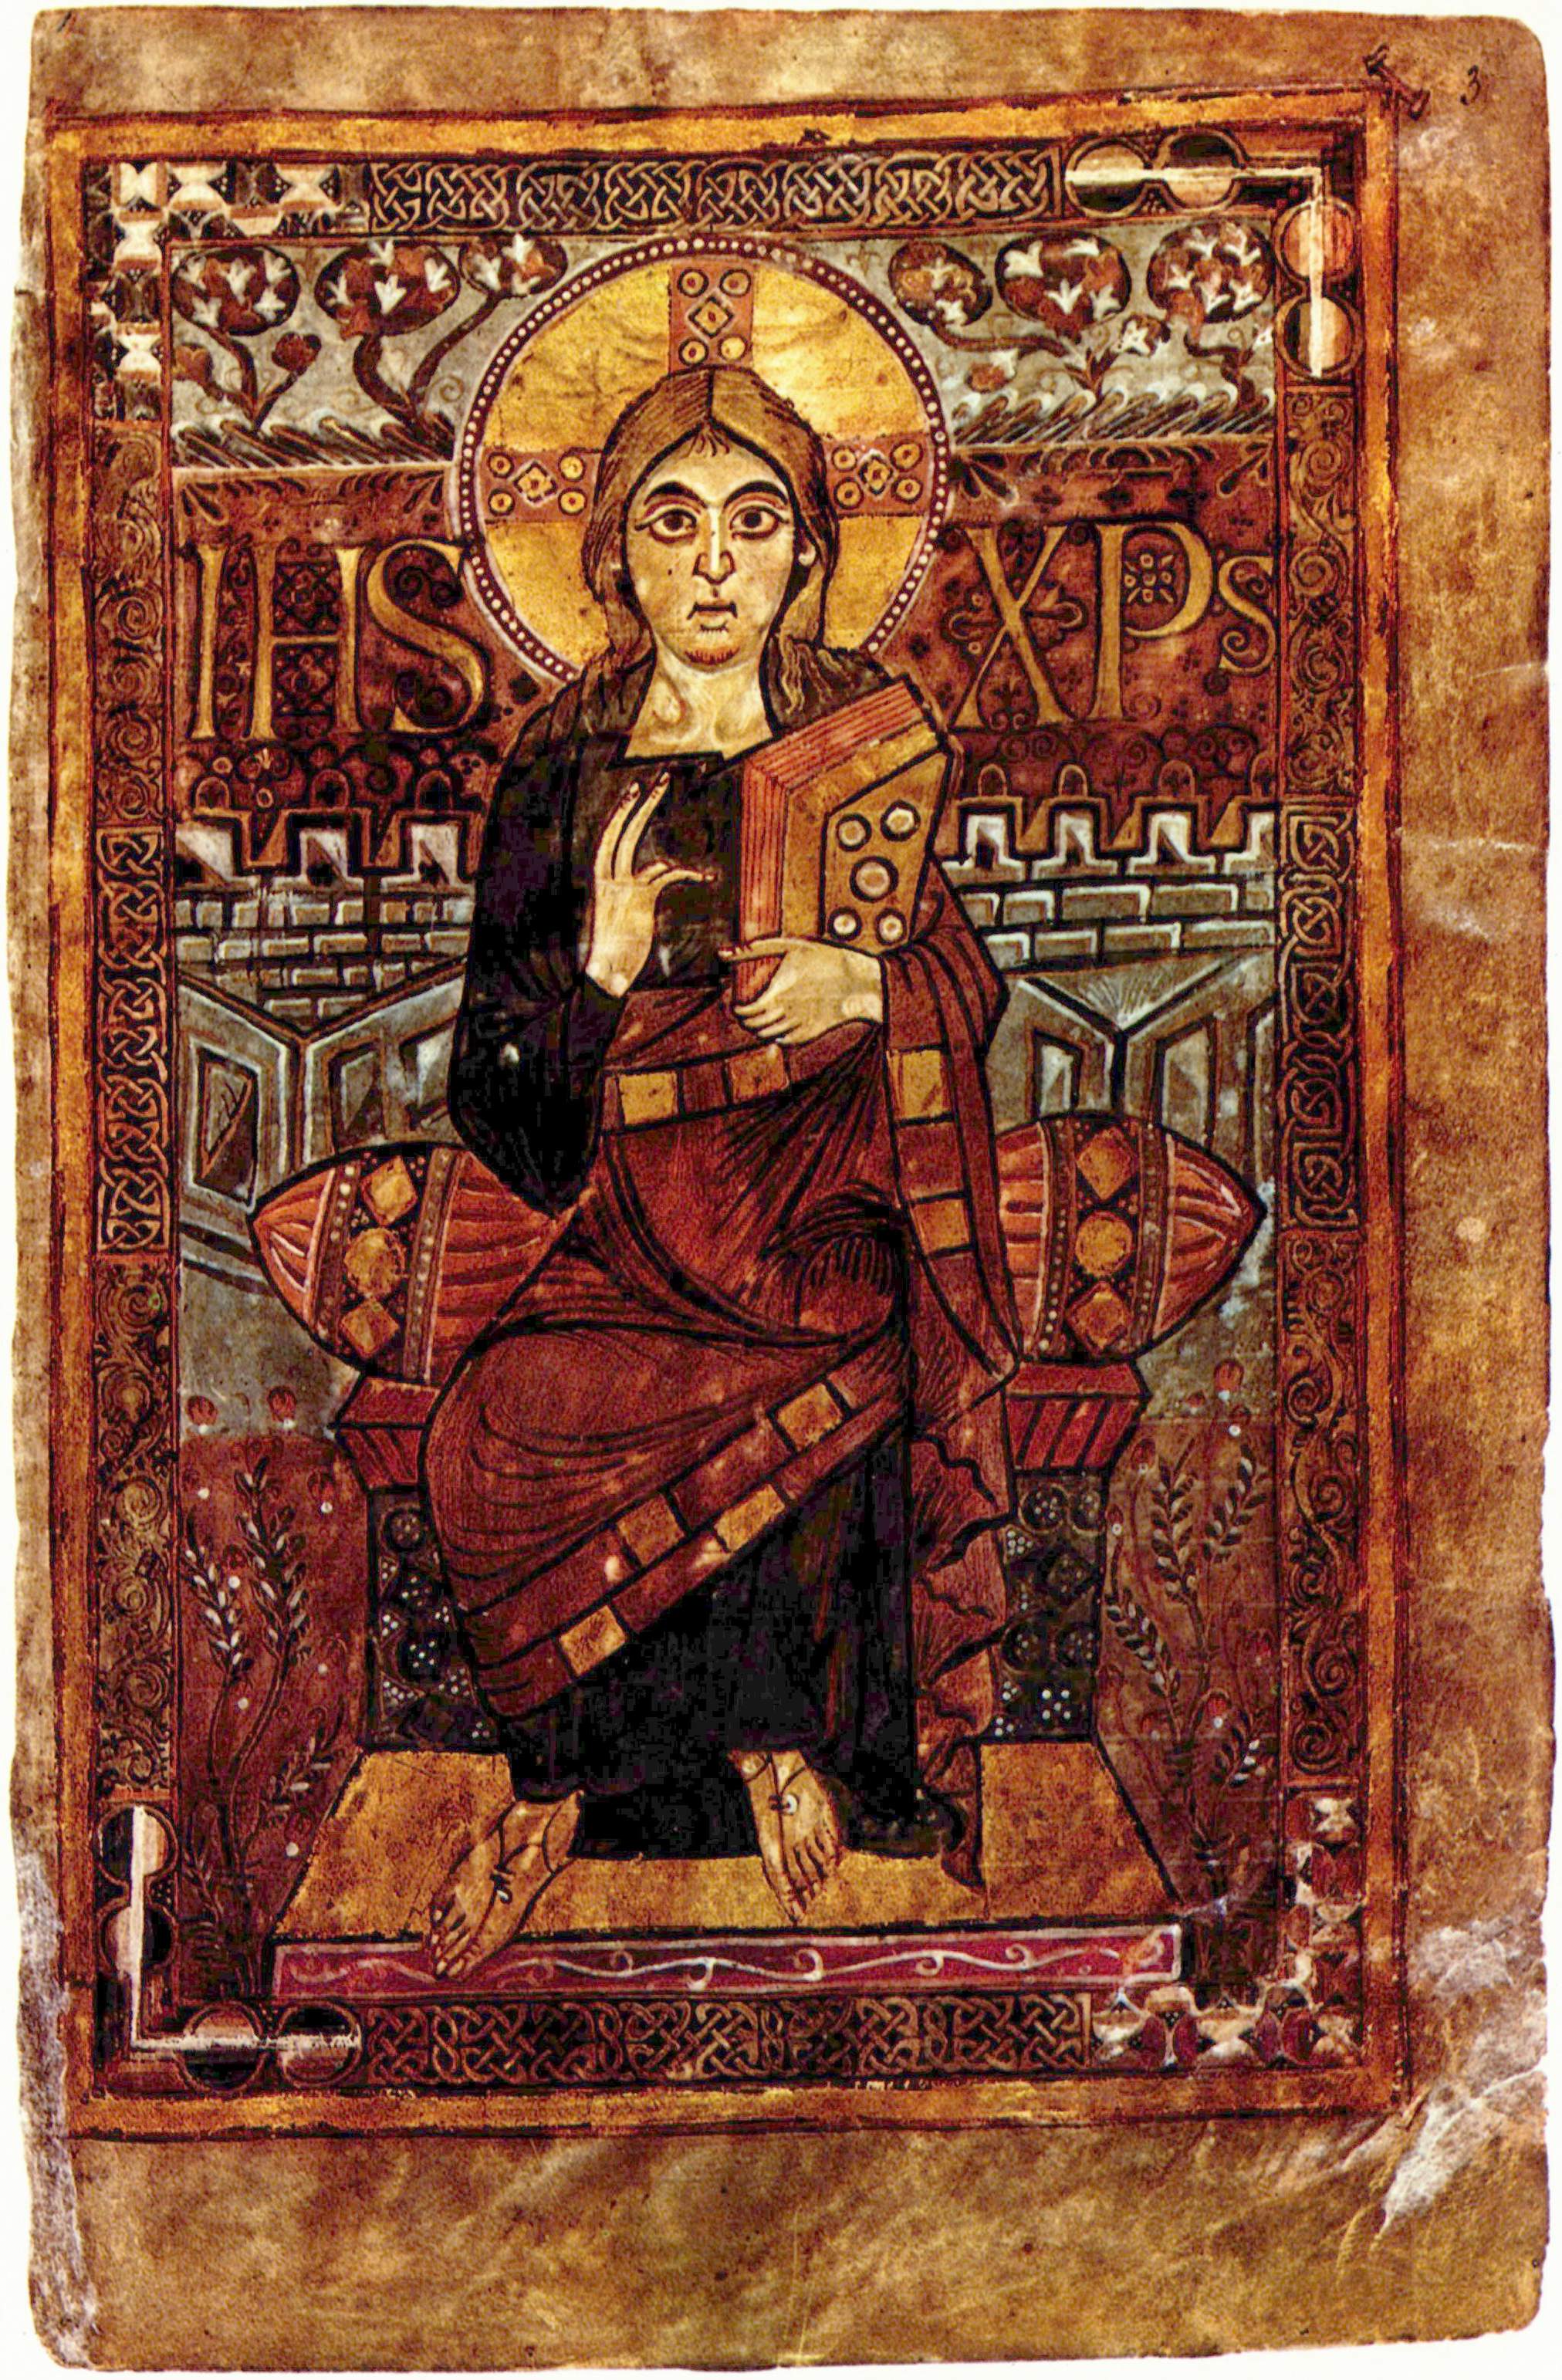 Christ in Majesty, miniature of Christ in the Godescalc Evangelistary